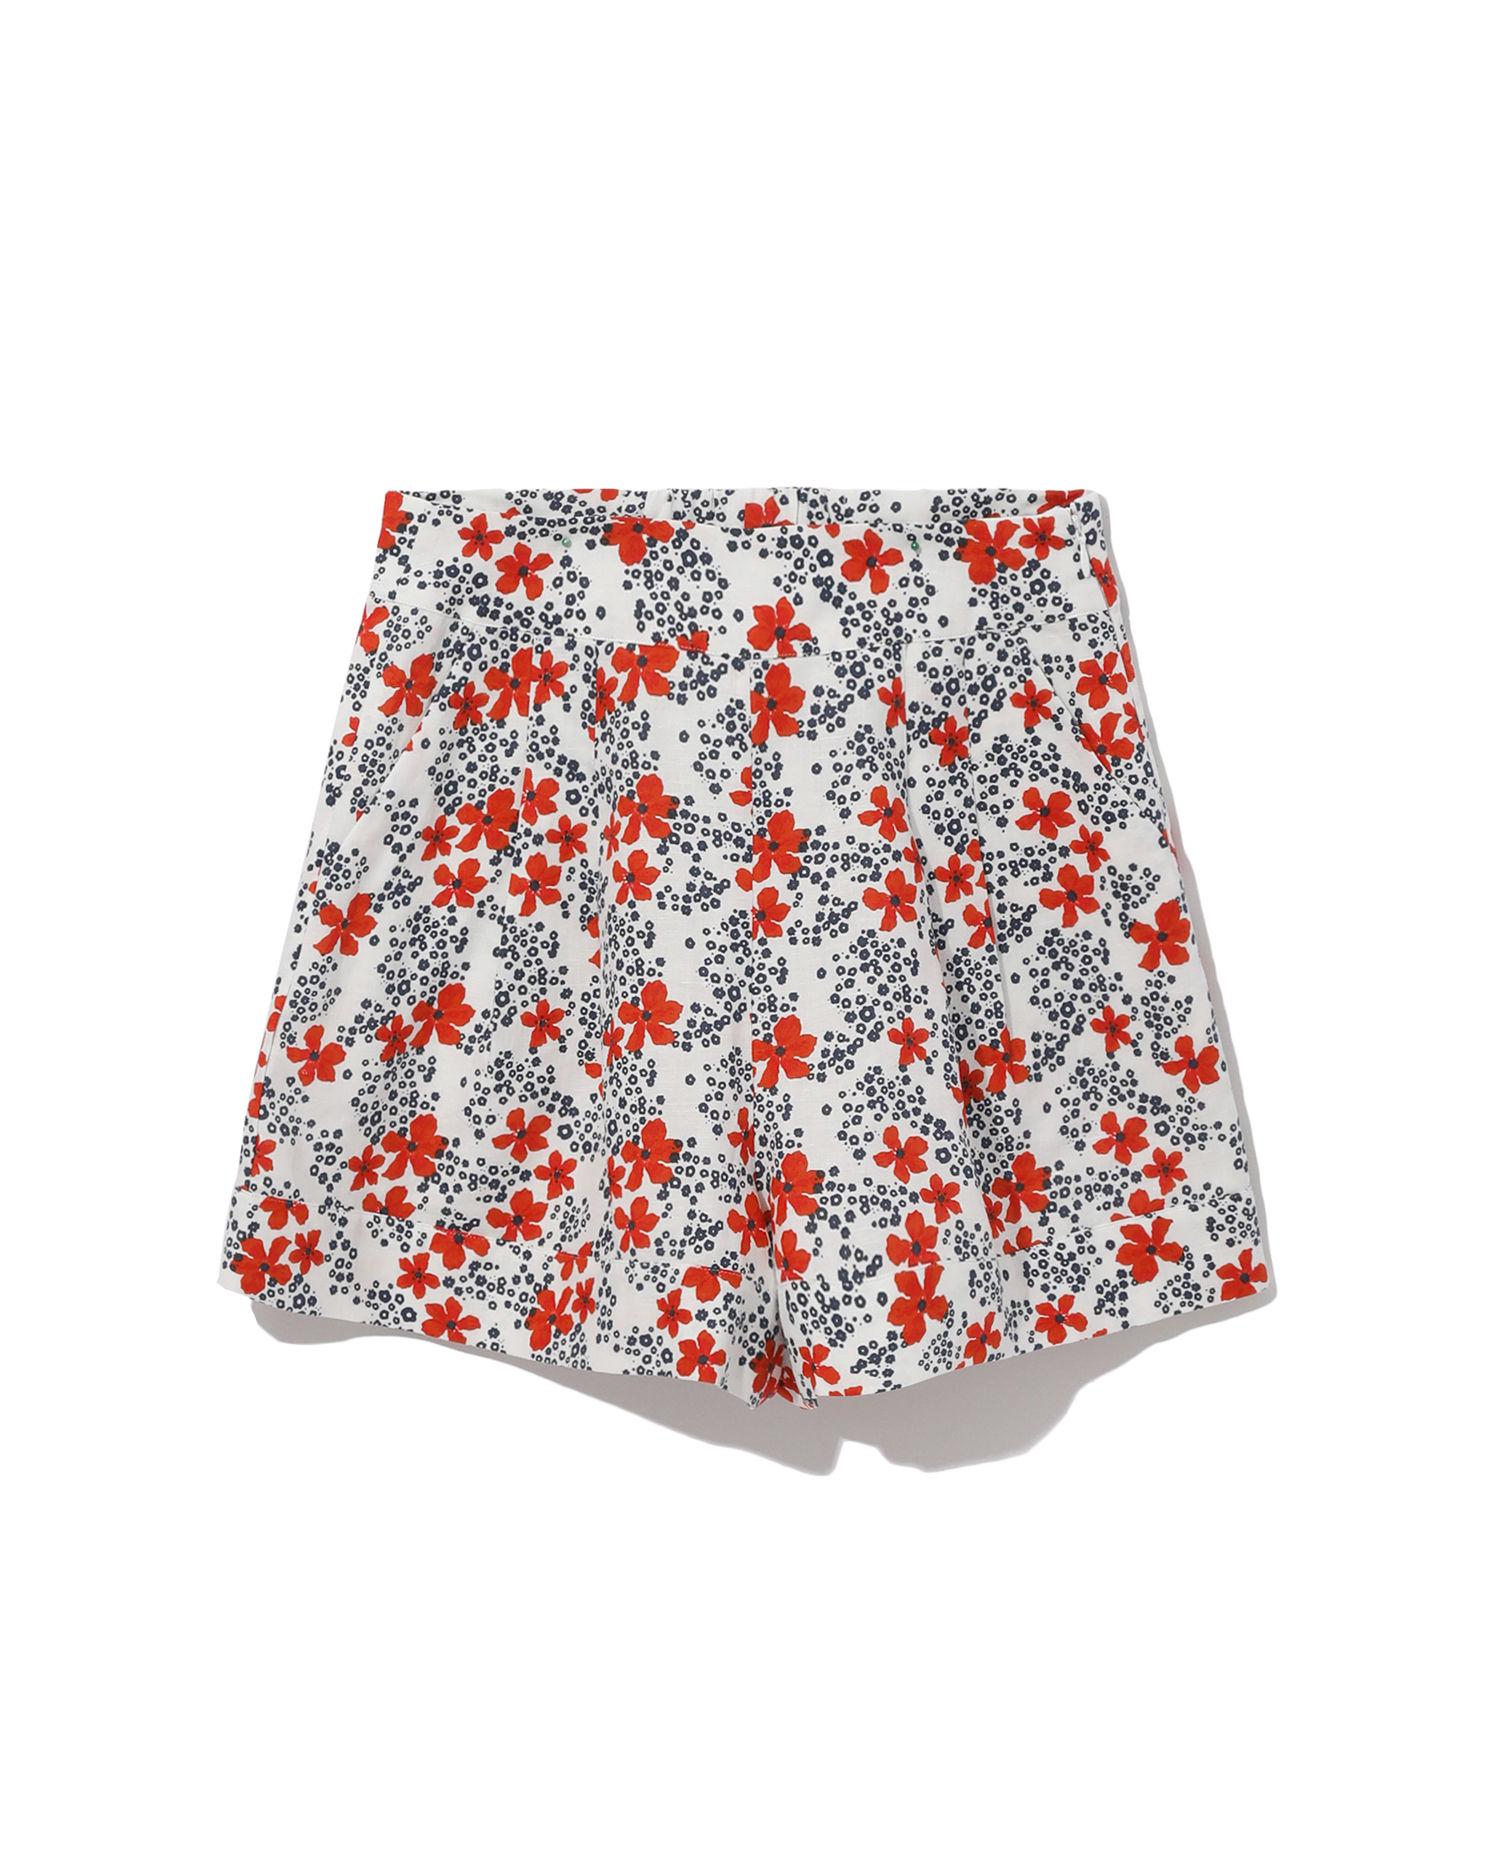 Double pleat relaxed shorts by B+AB